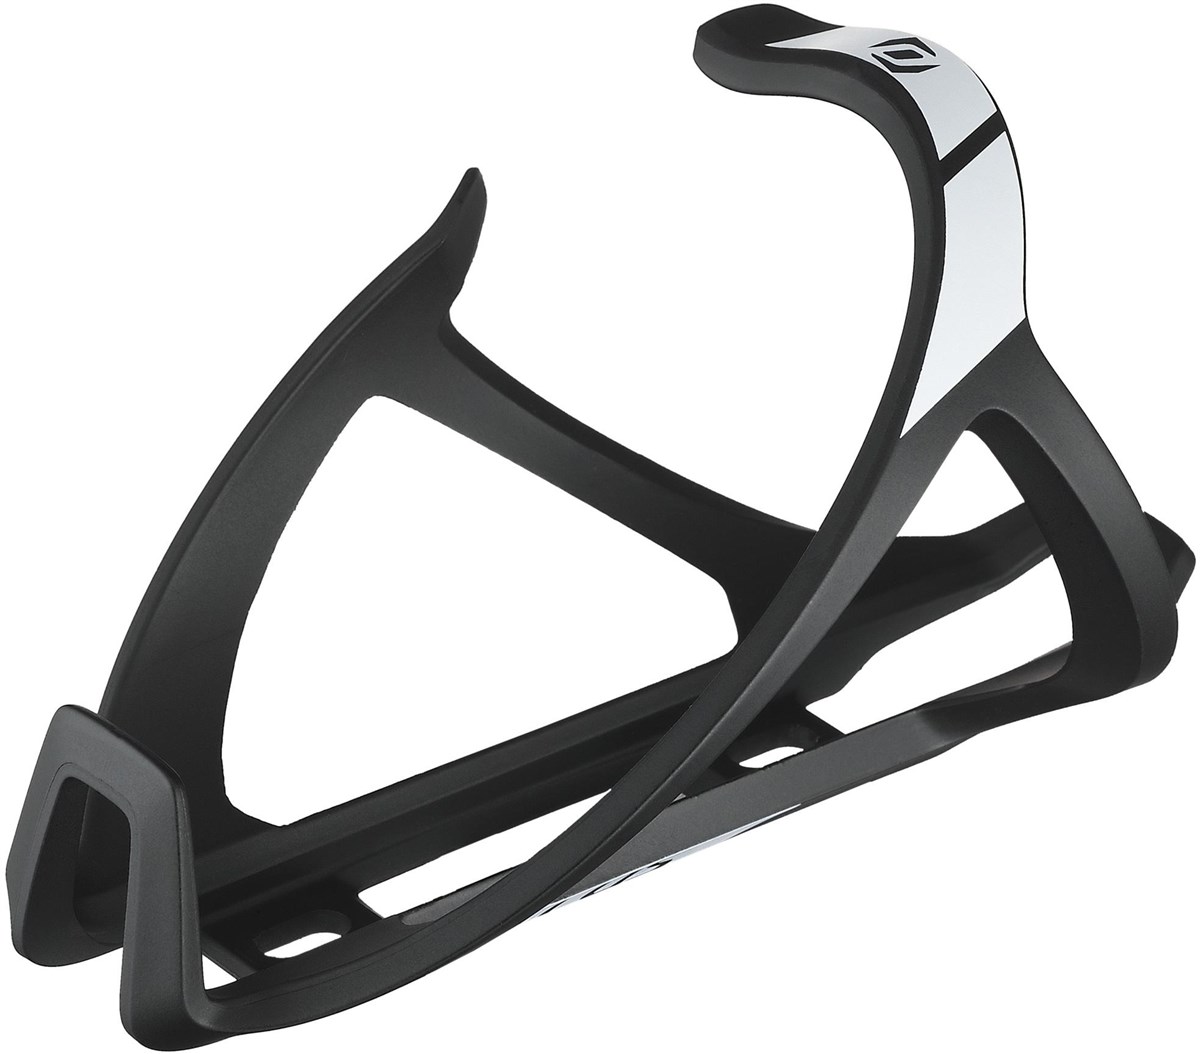 Syncros Tailor Cage 1.5 Left Bottle Cage product image